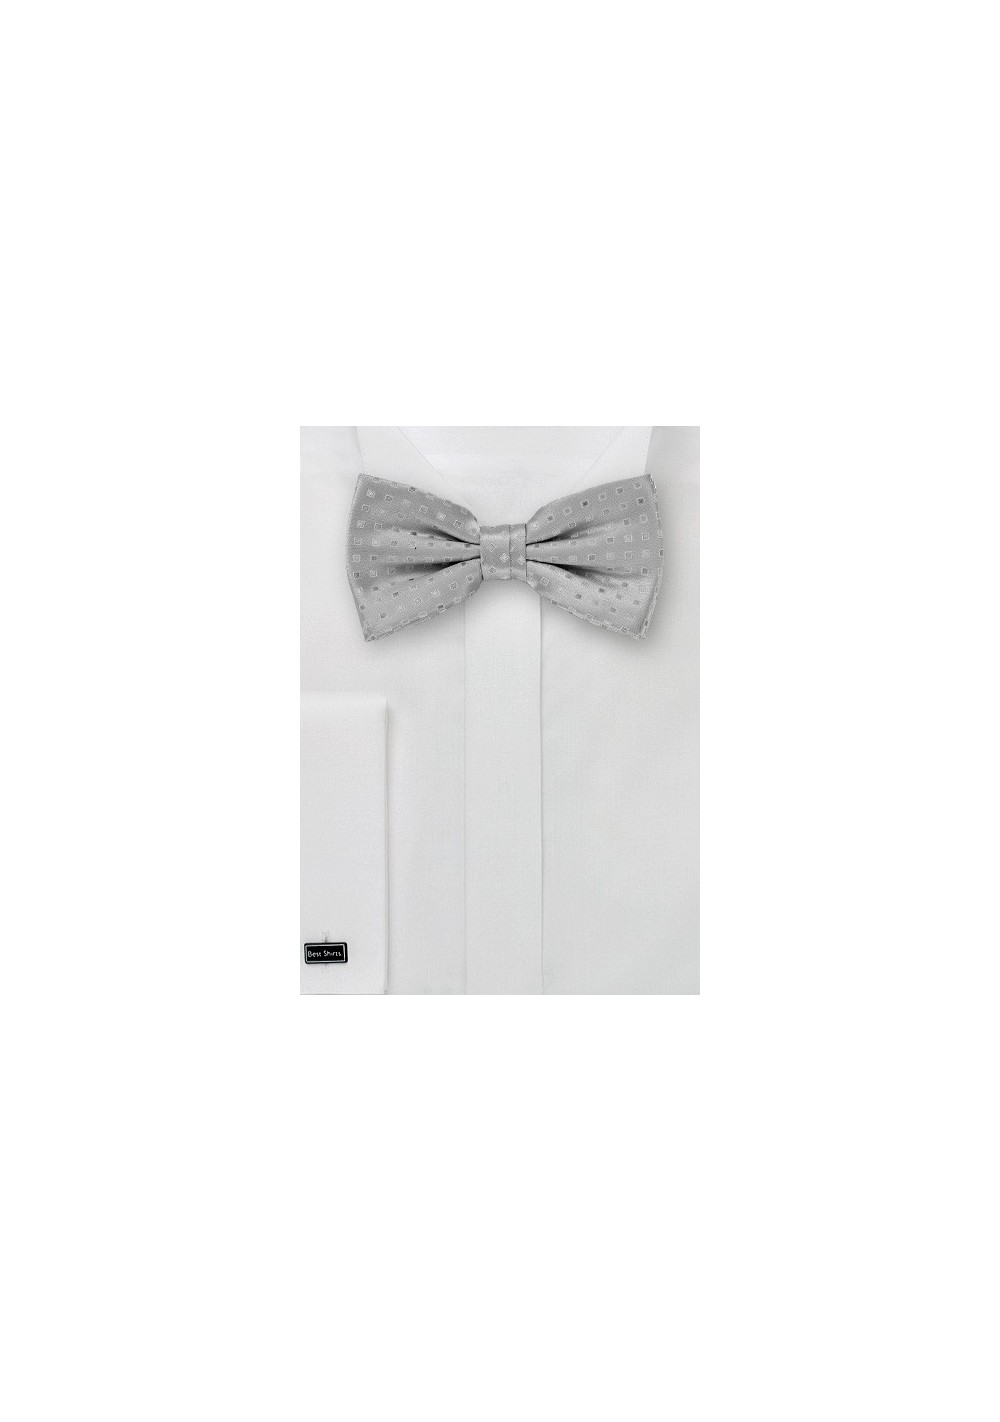 Silver Bow Ties - Bow Tie & Matching Pocket Square